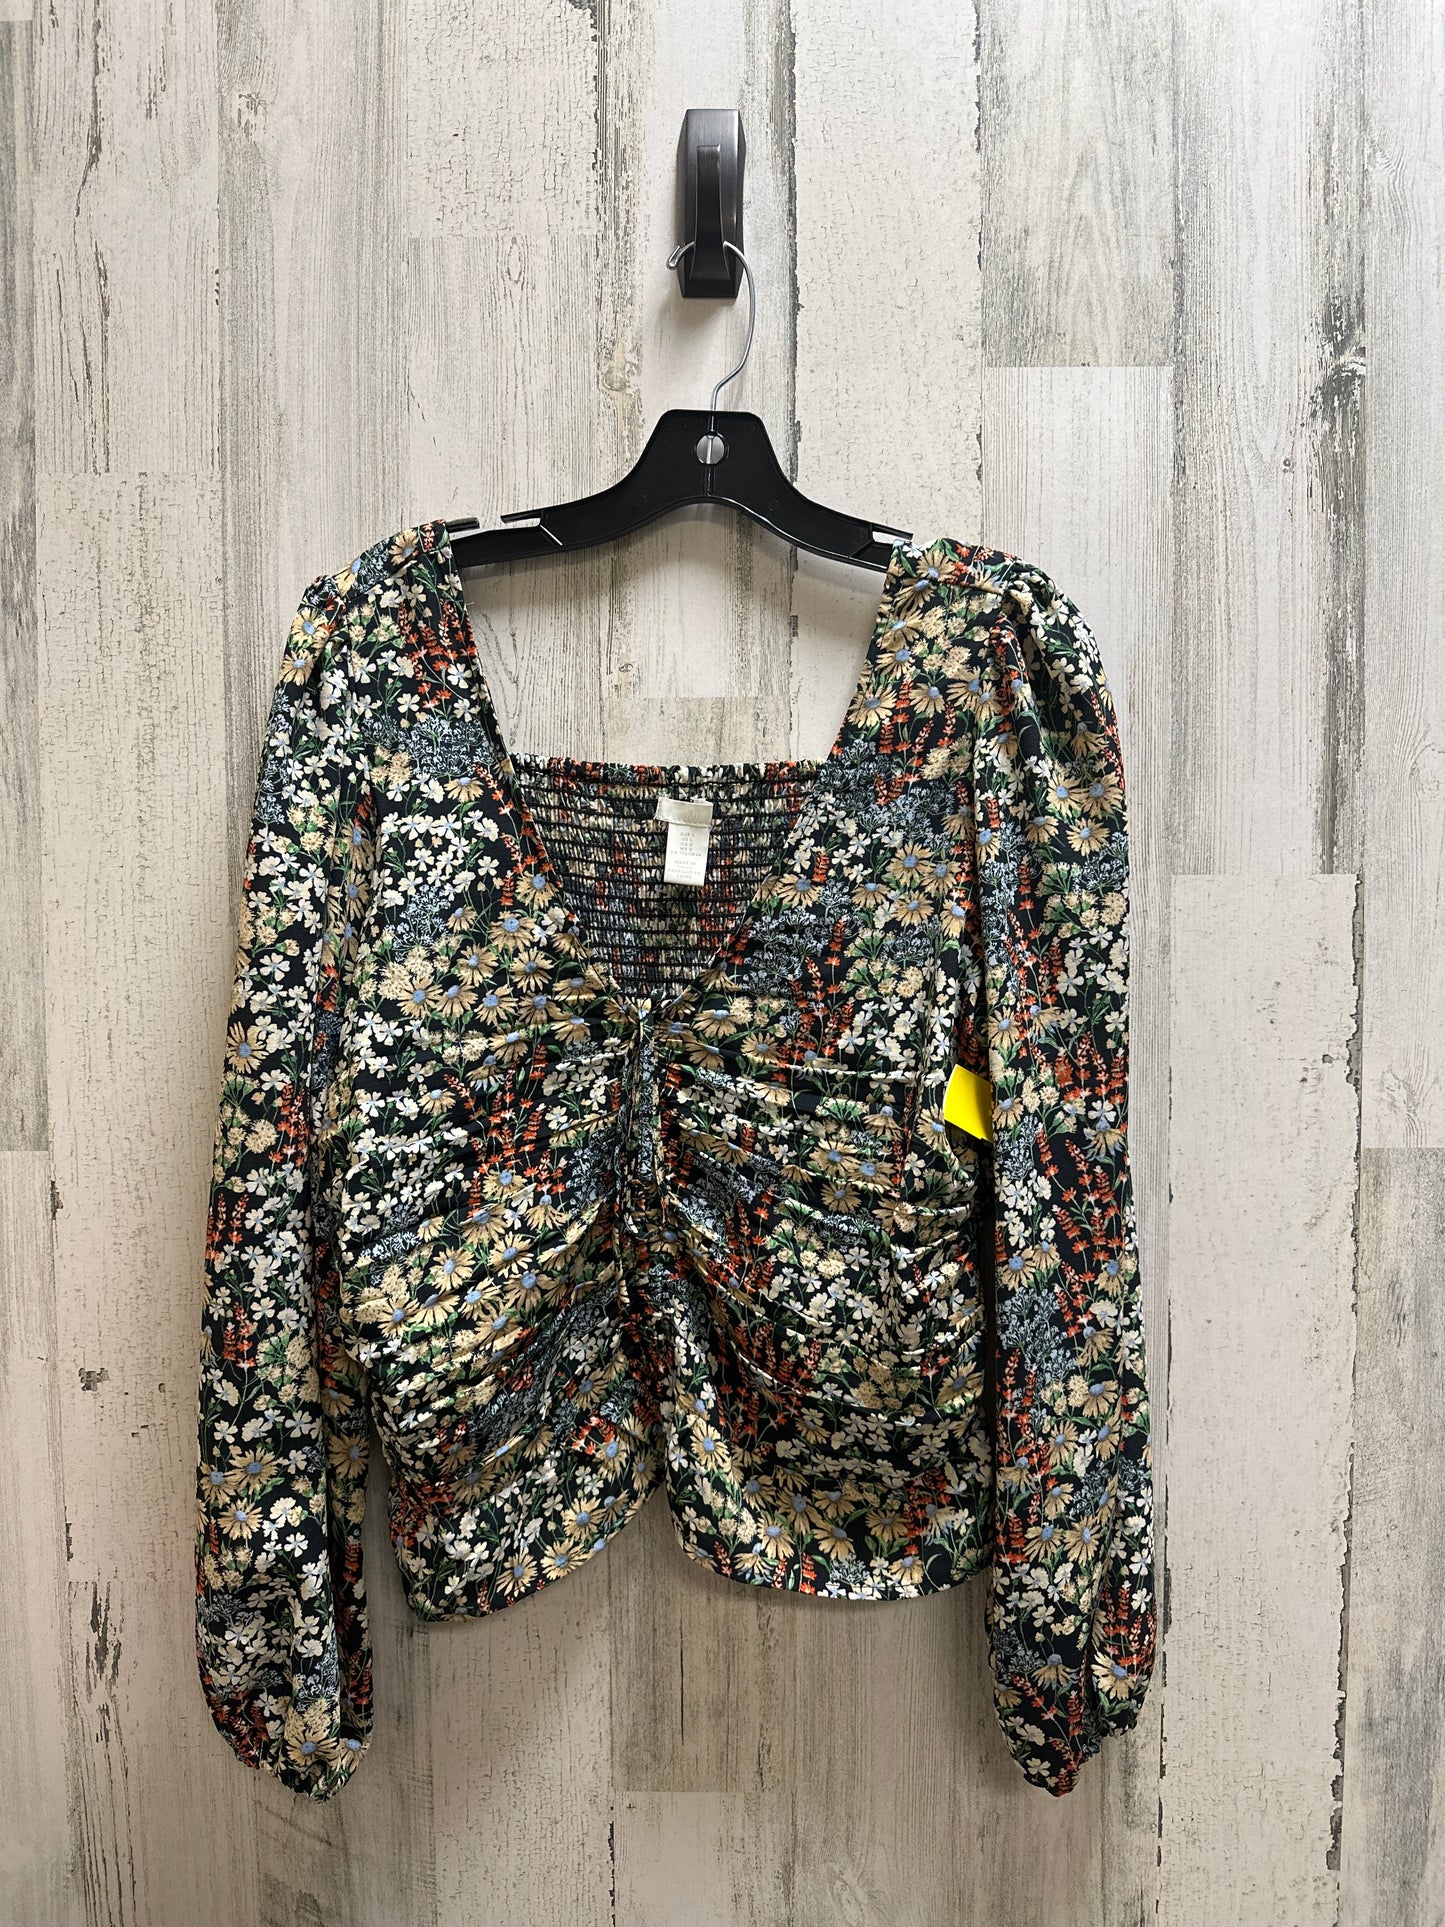 Top Long Sleeve By H&m  Size: L